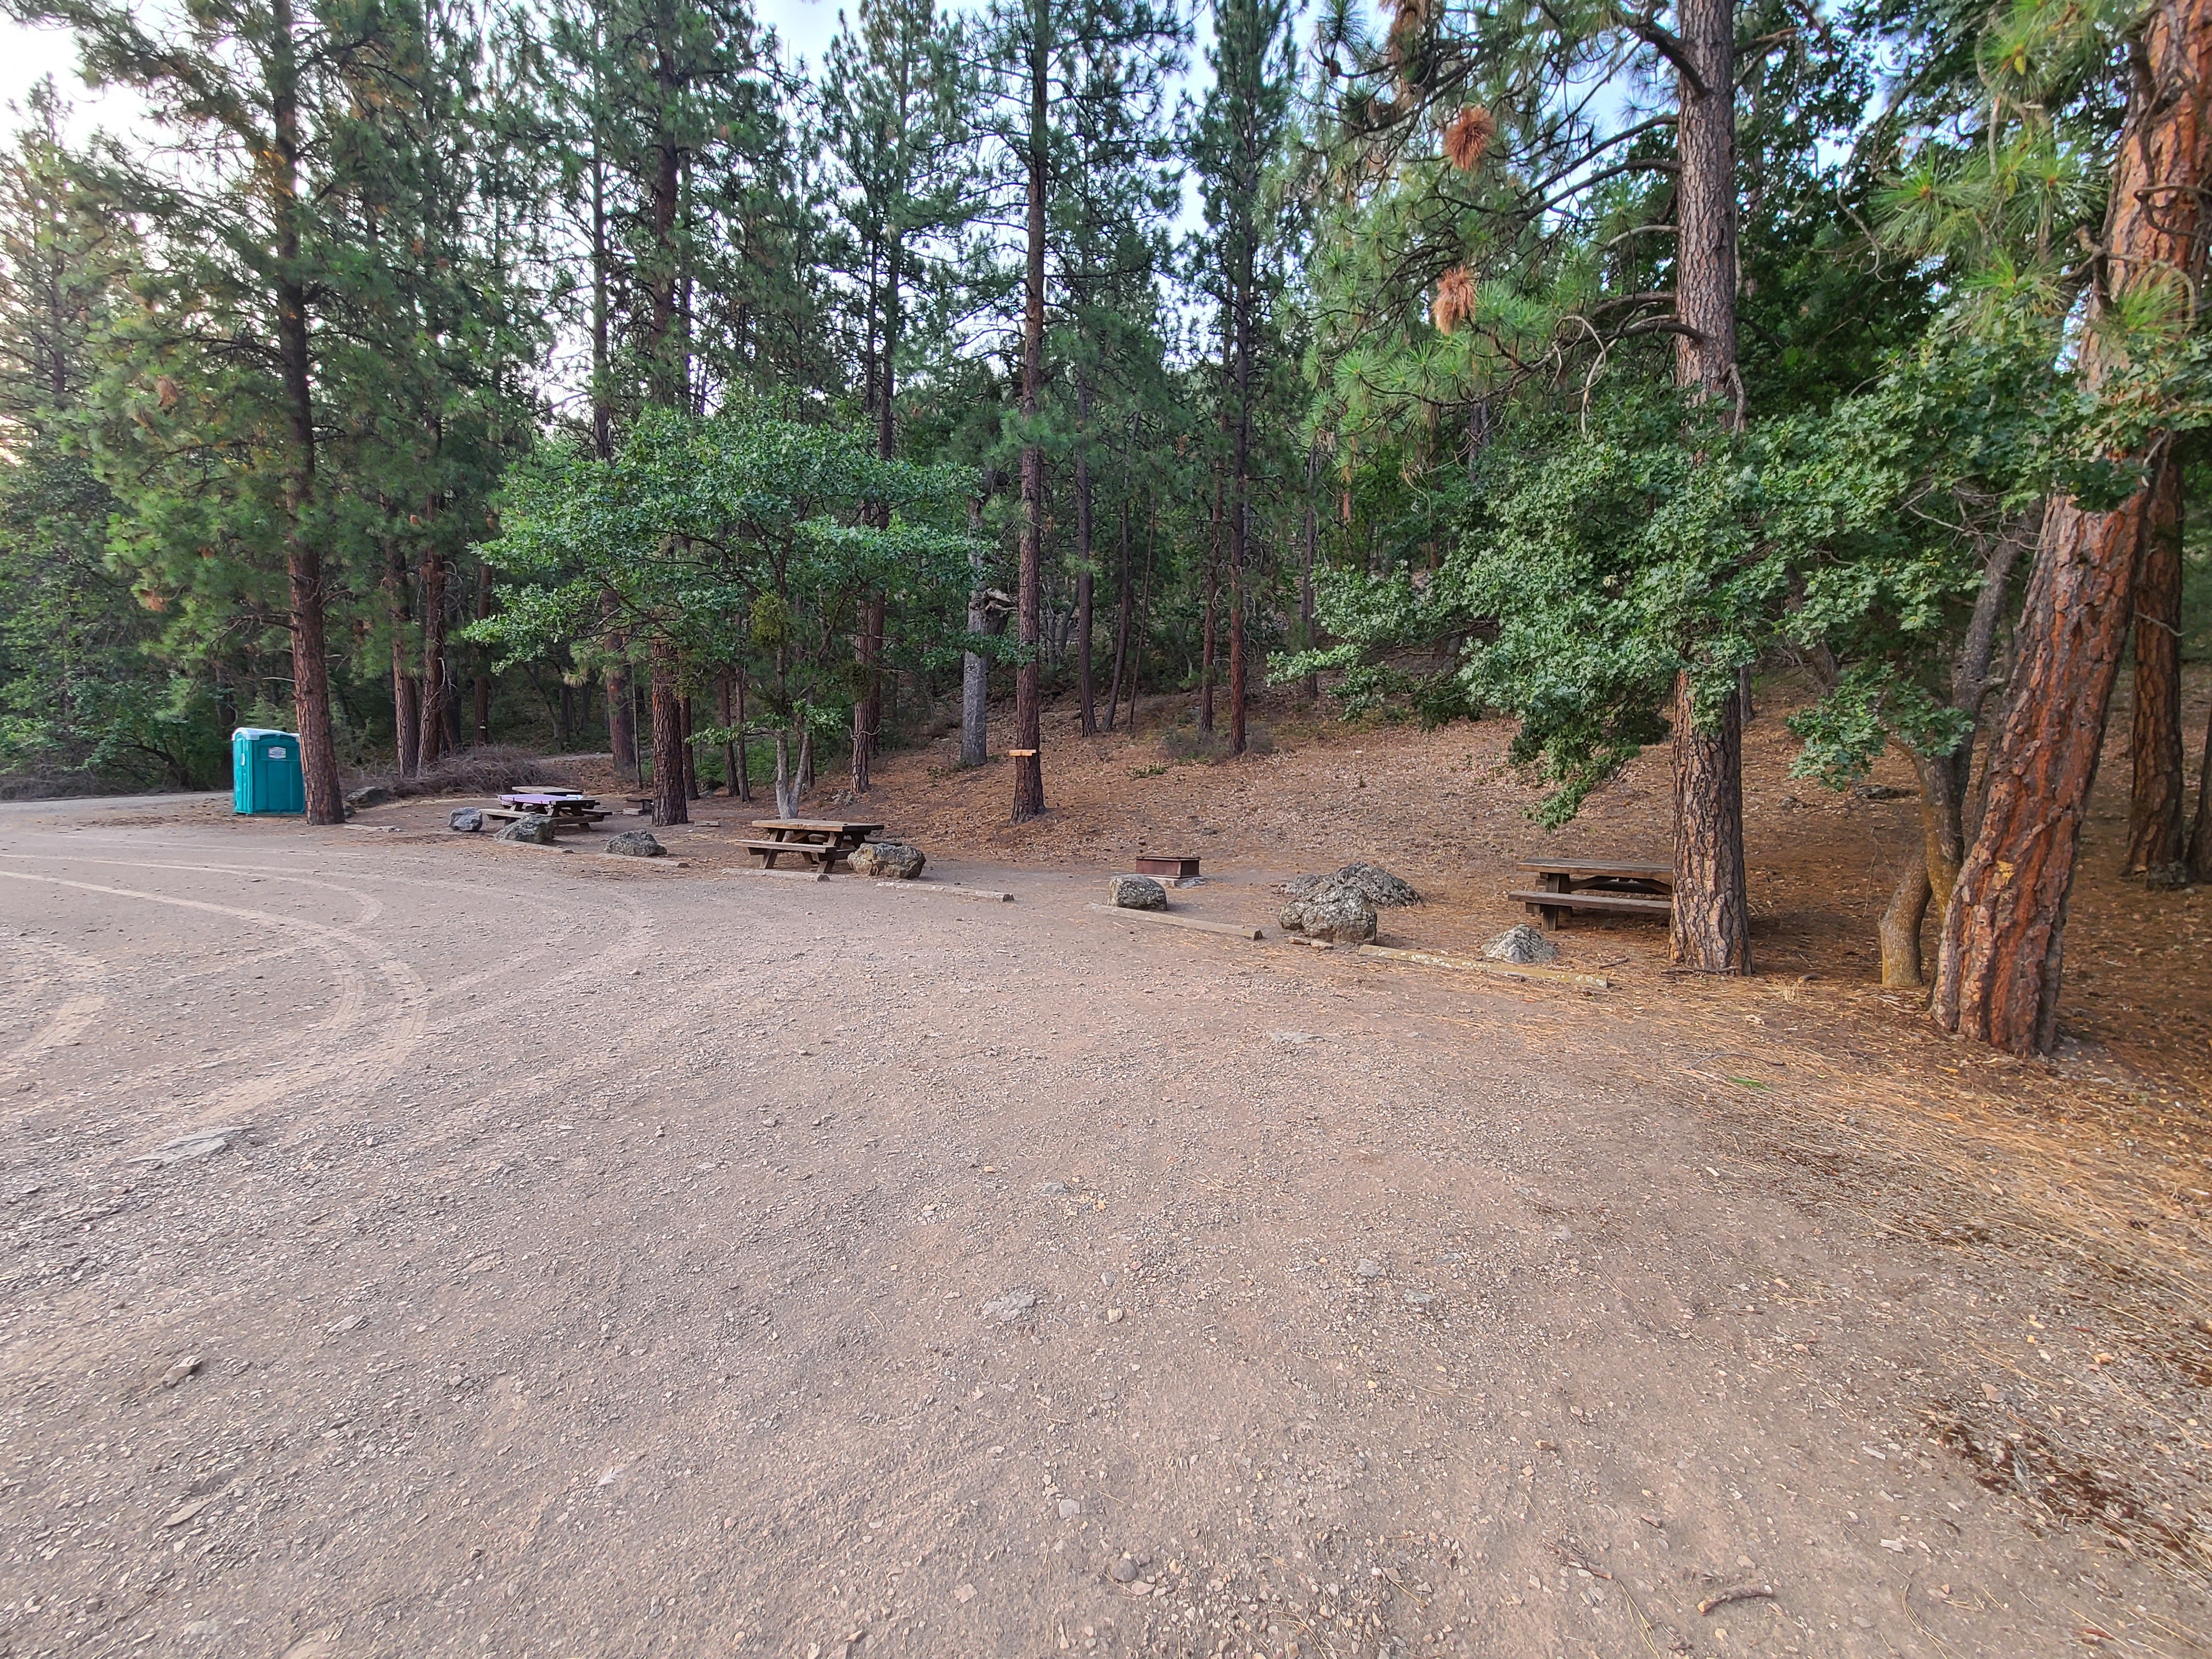 3 firepits and picnic tables under trees, fairly close together.